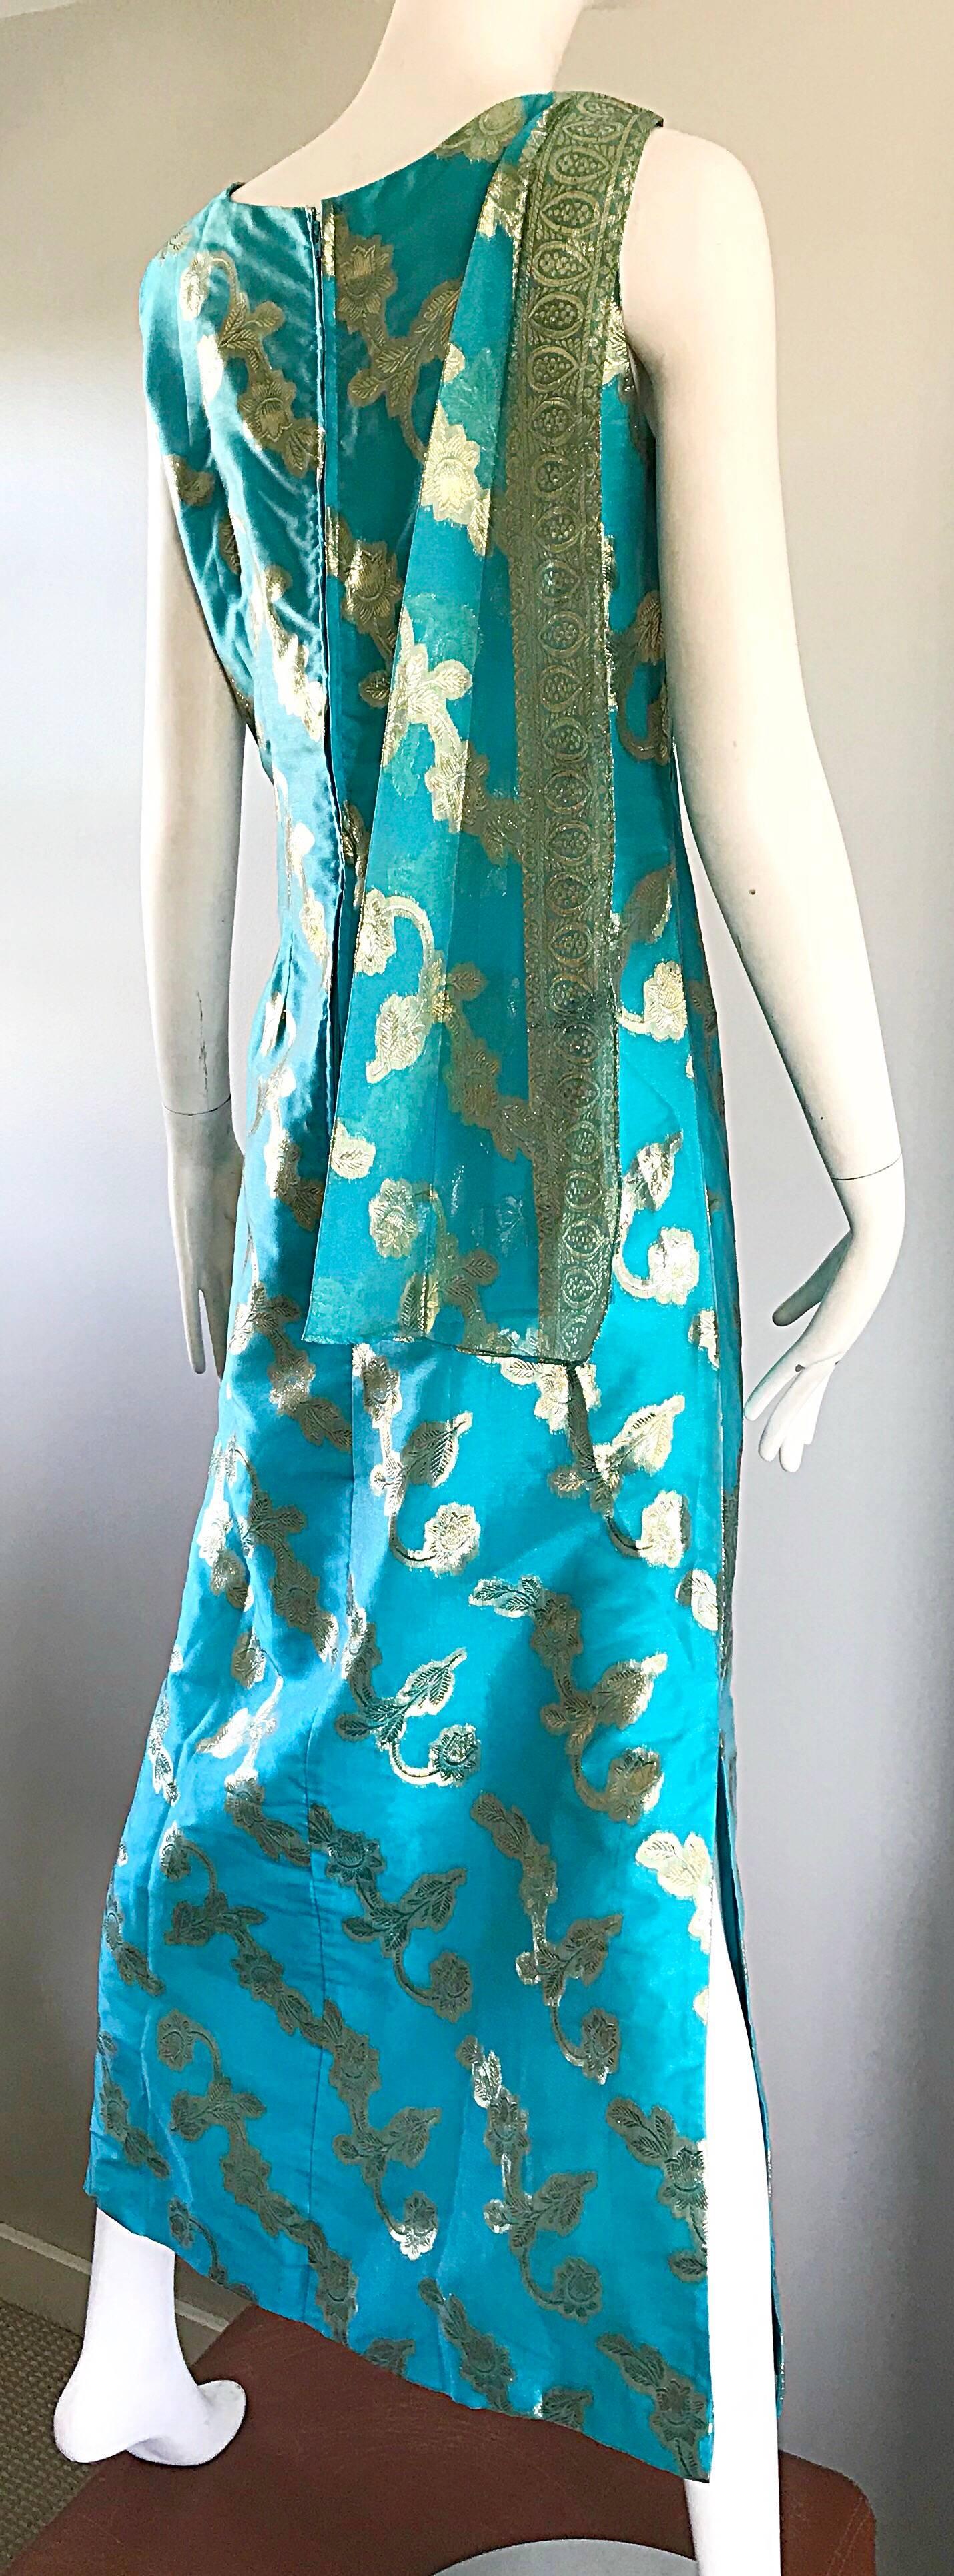 Women's 1960s Waltah Clarke's Turquoise Blue and Gold Vintage 60s Silk Maxi Dress For Sale